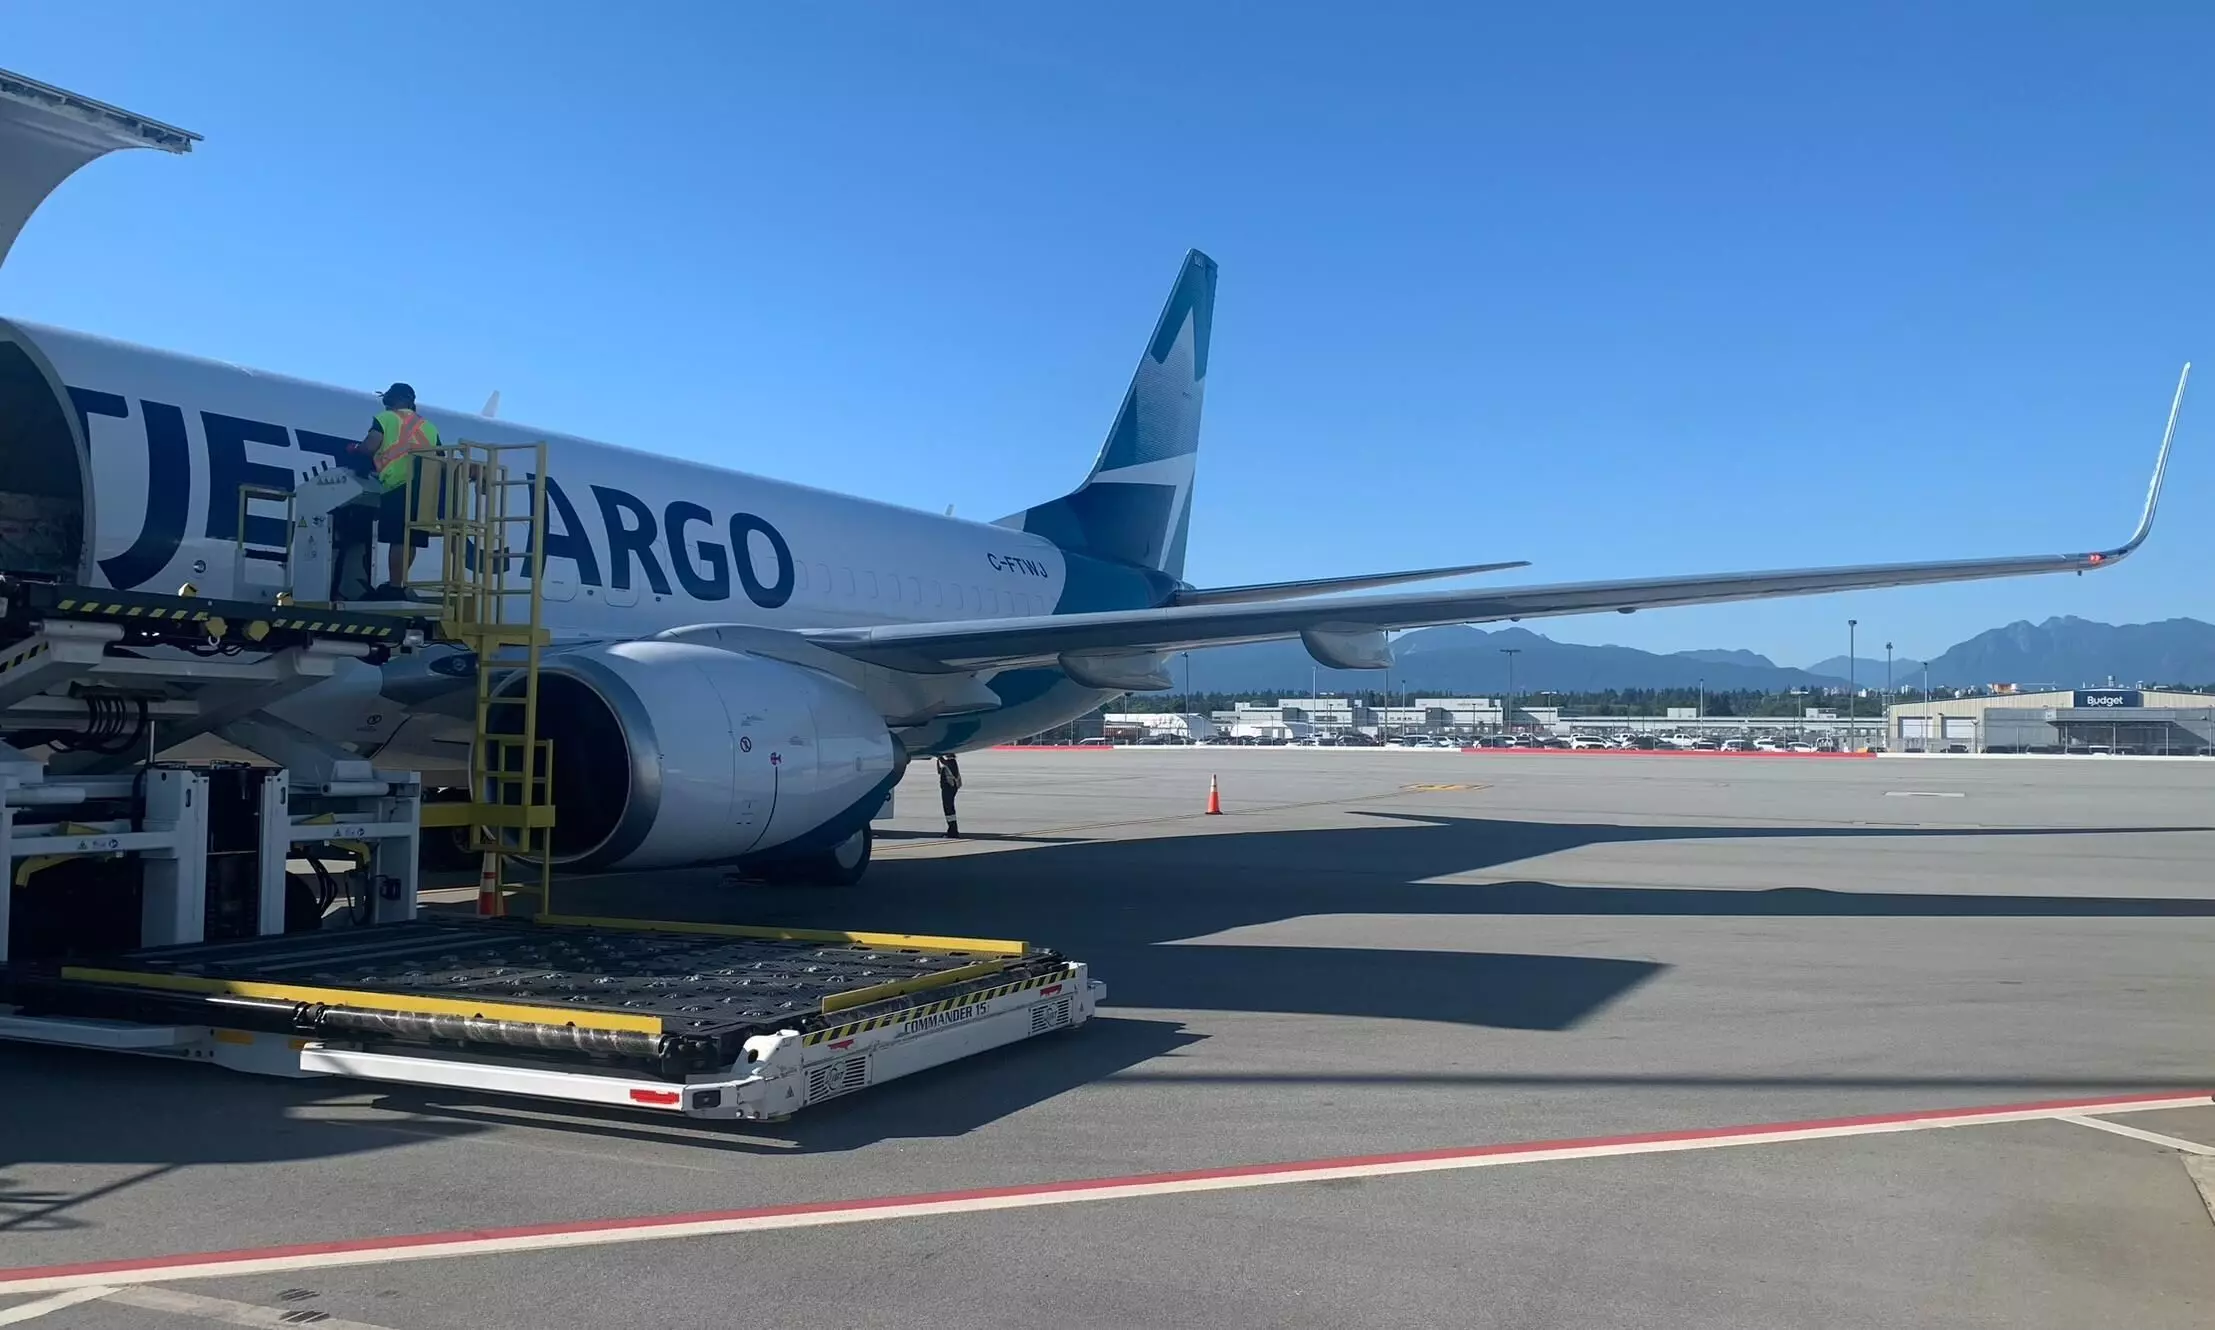 WestJet Cargo freighter at Vancouver International Airport (YVR)